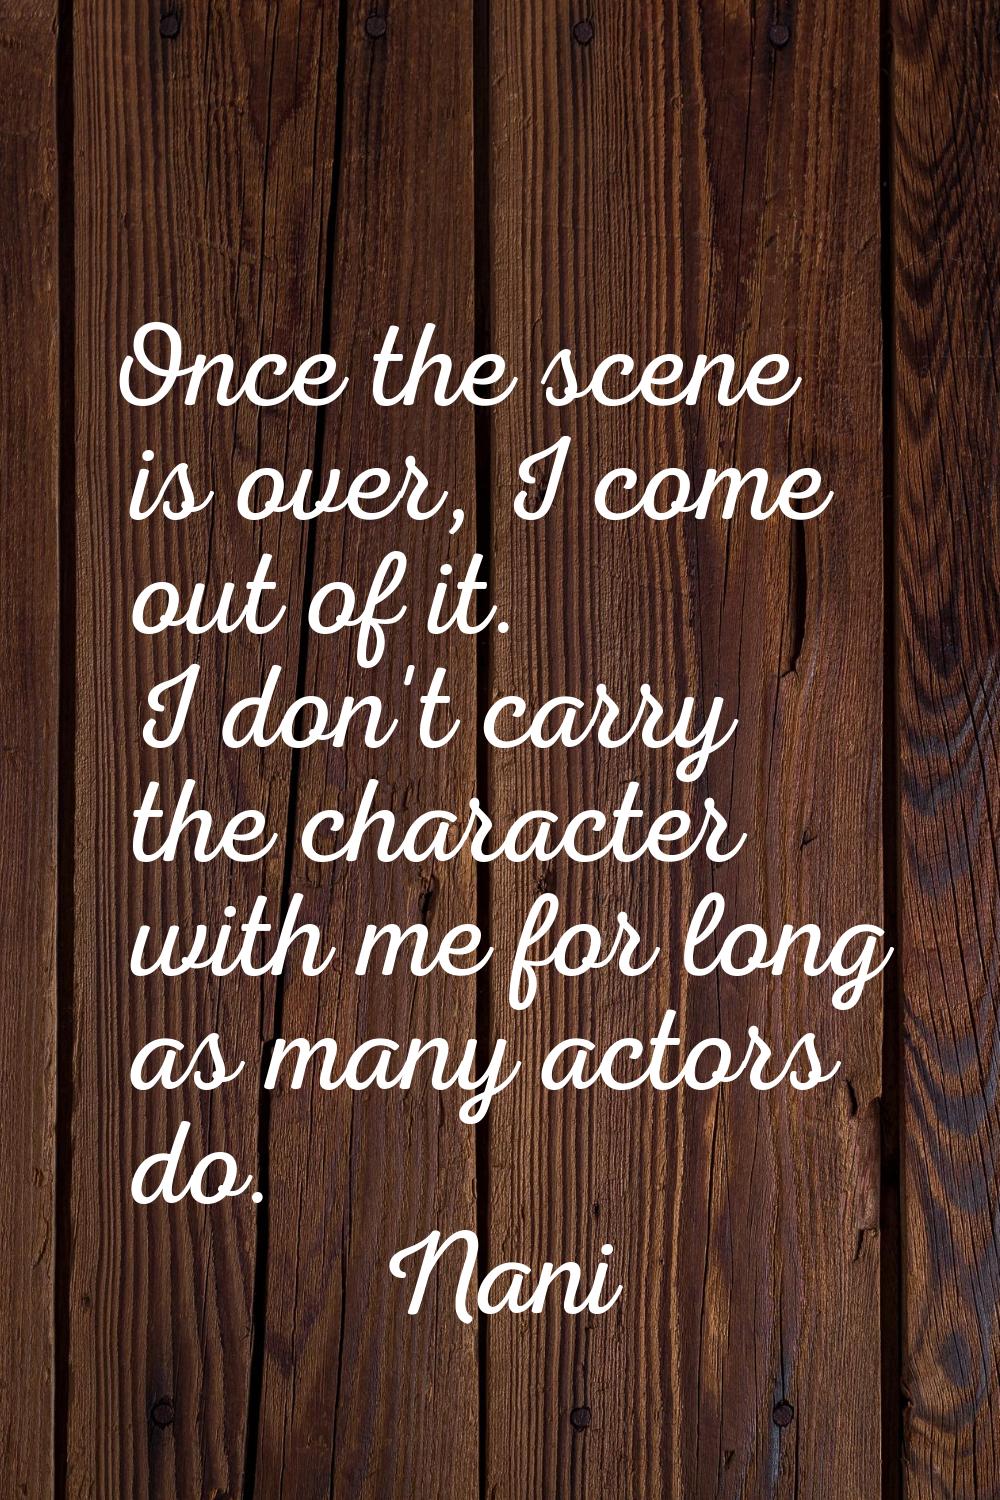 Once the scene is over, I come out of it. I don't carry the character with me for long as many acto